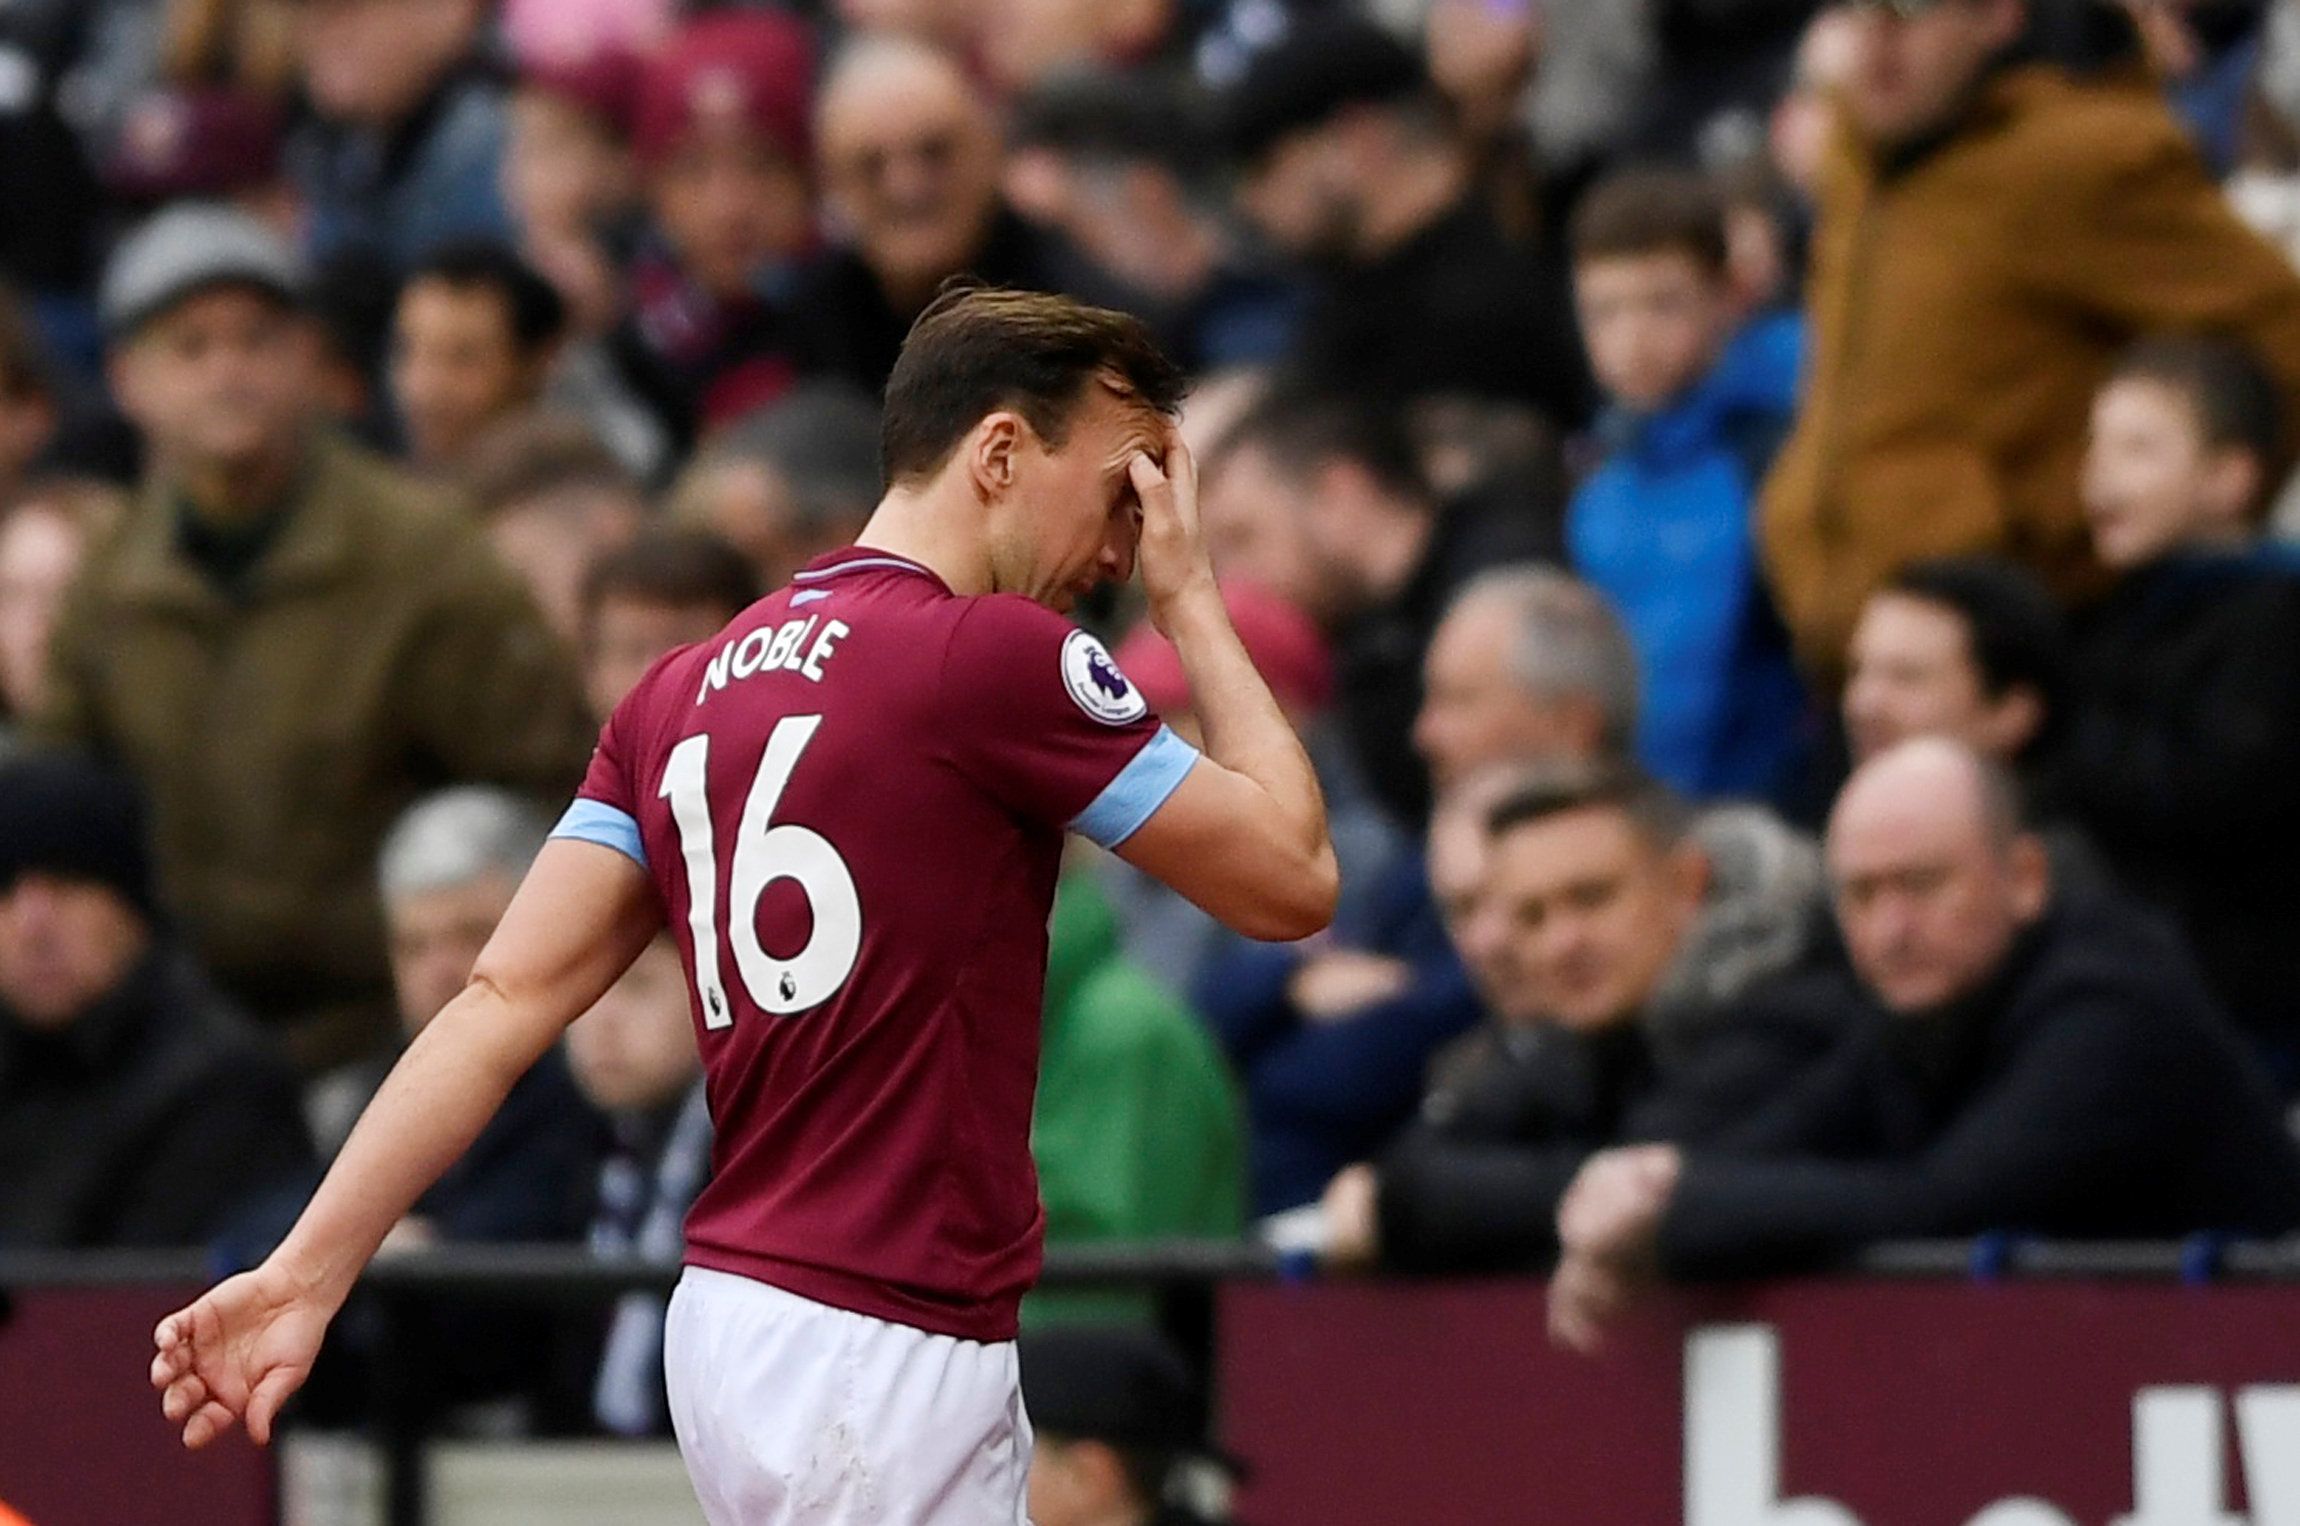 Soccer Football - Premier League - West Ham United v Huddersfield Town - London Stadium, London, Britain - March 16, 2019  West Ham's Mark Noble reacts after he is substituted             Action Images via Reuters/Tony O'Brien  EDITORIAL USE ONLY. No use with unauthorized audio, video, data, fixture lists, club/league logos or 